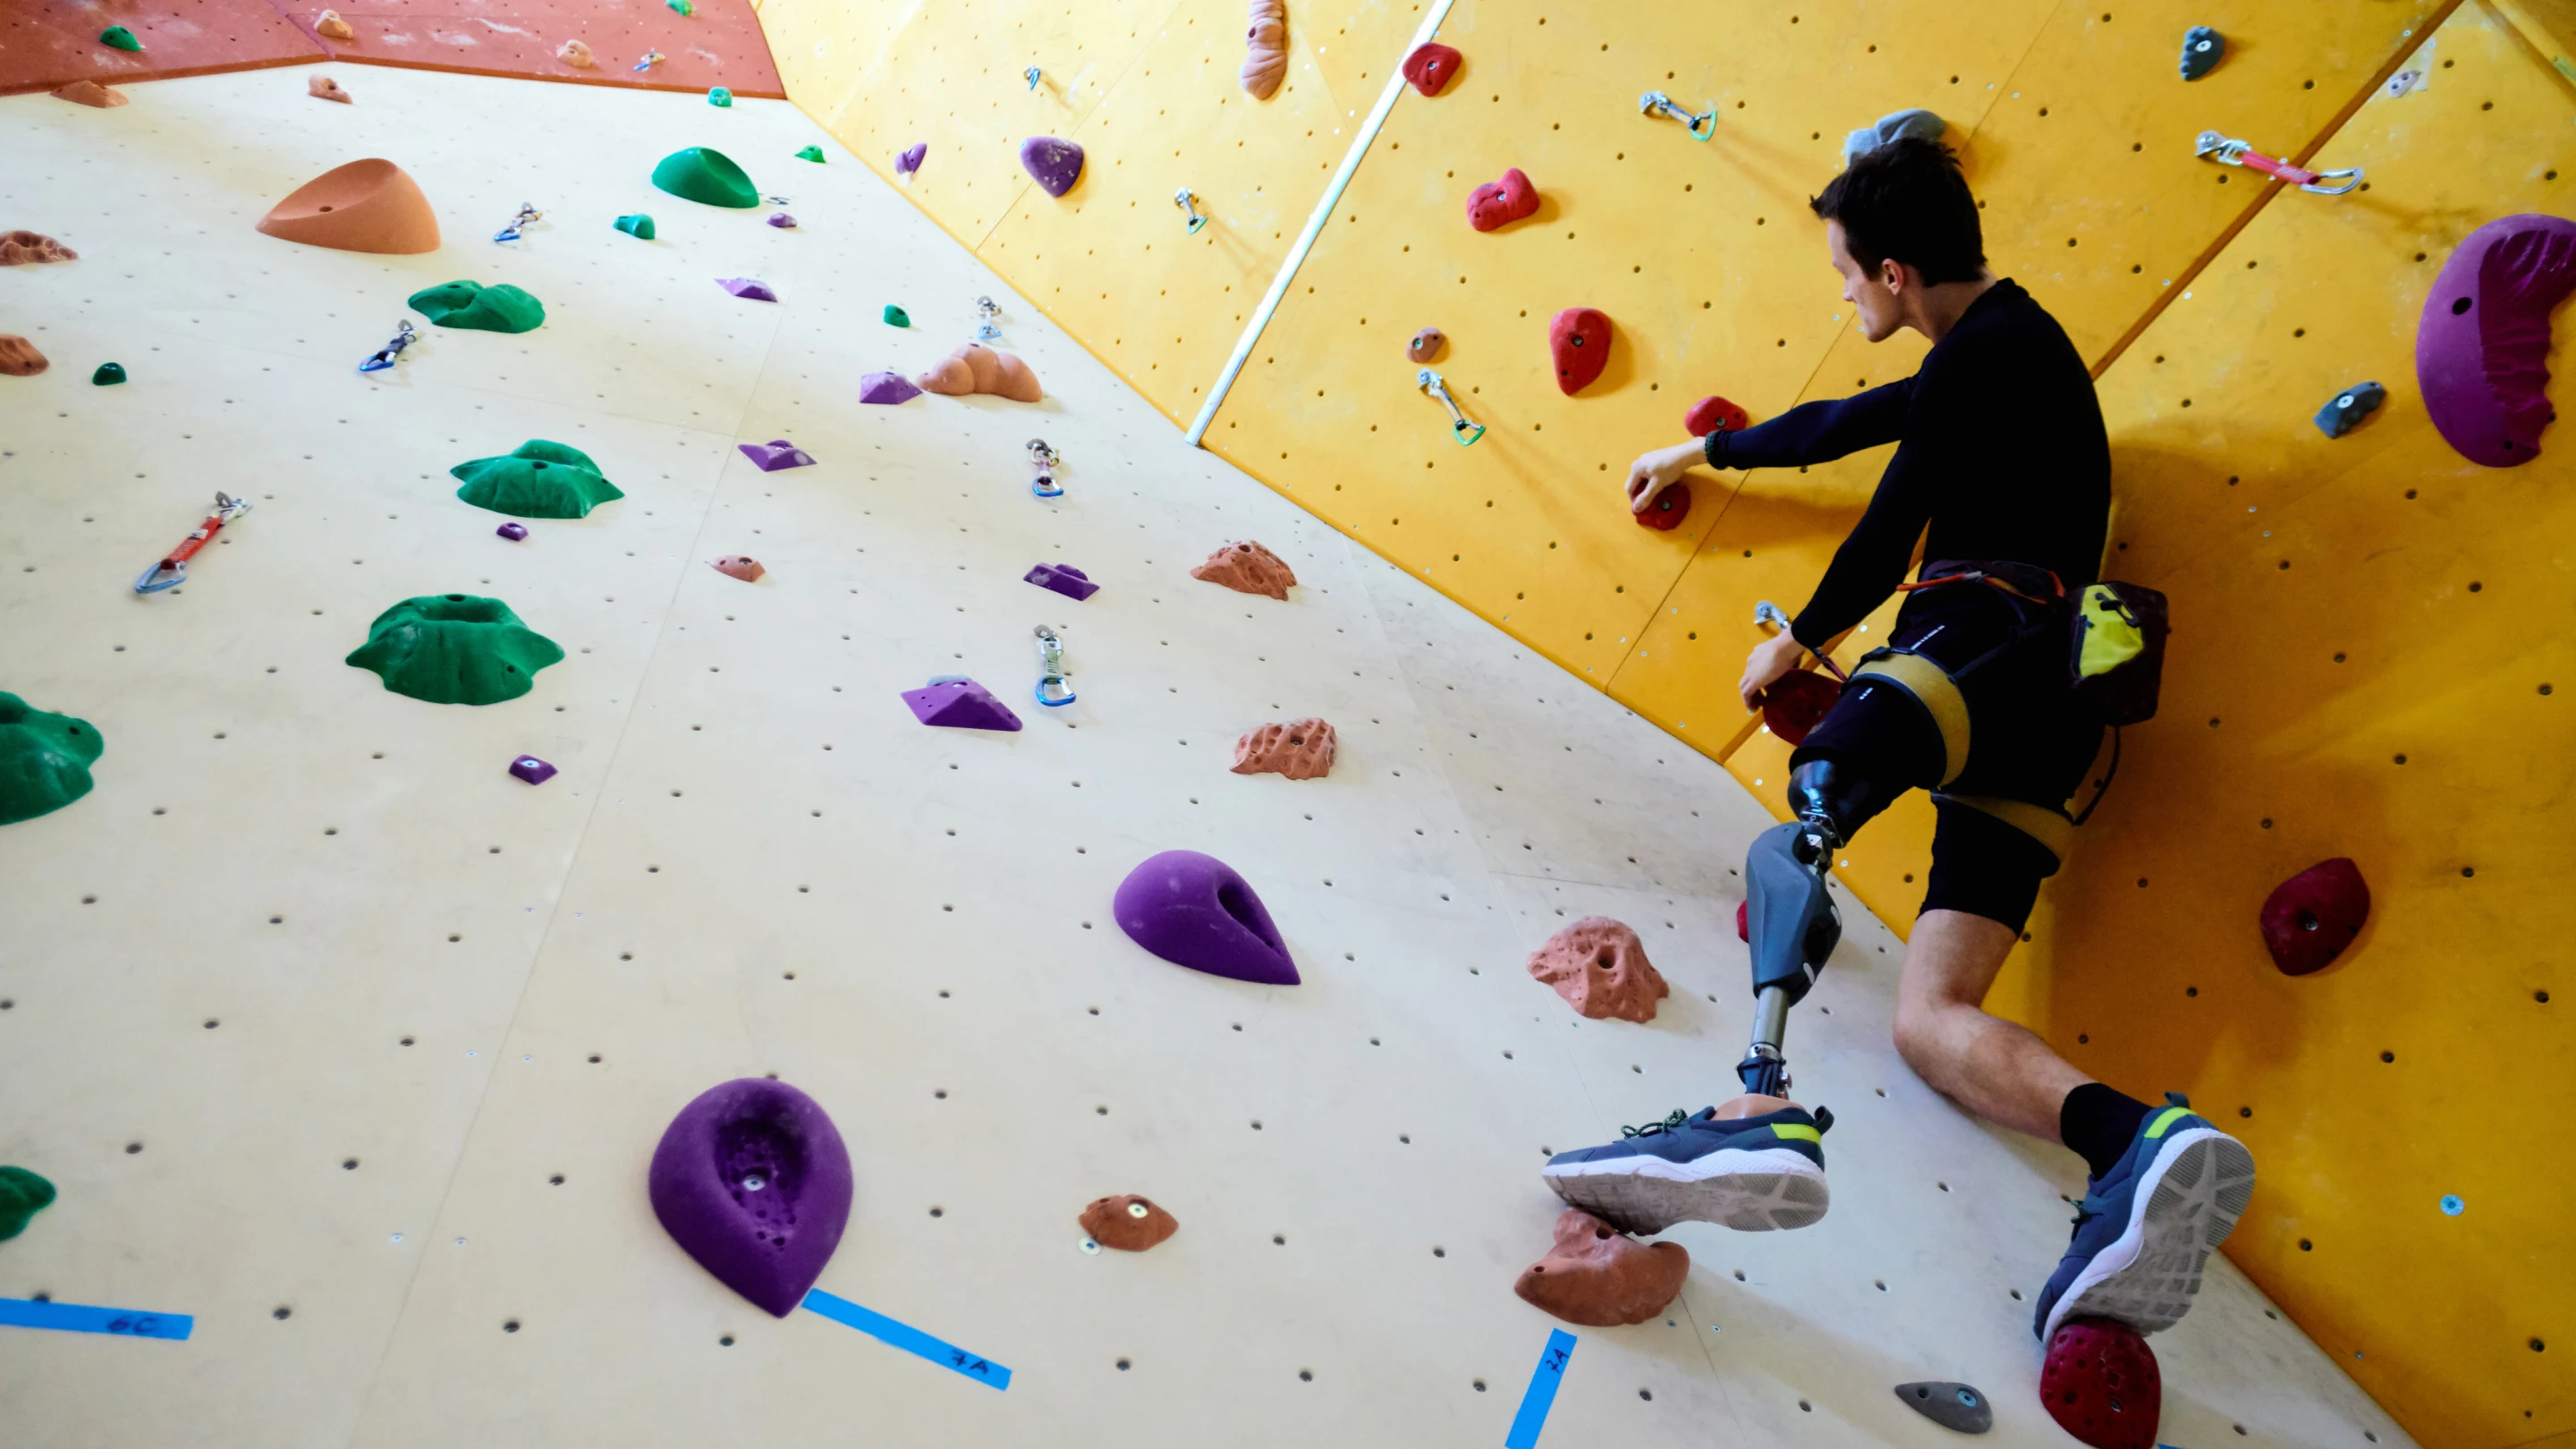 White man with a prosthetic left leg on a white, yellow and red climbing structure.